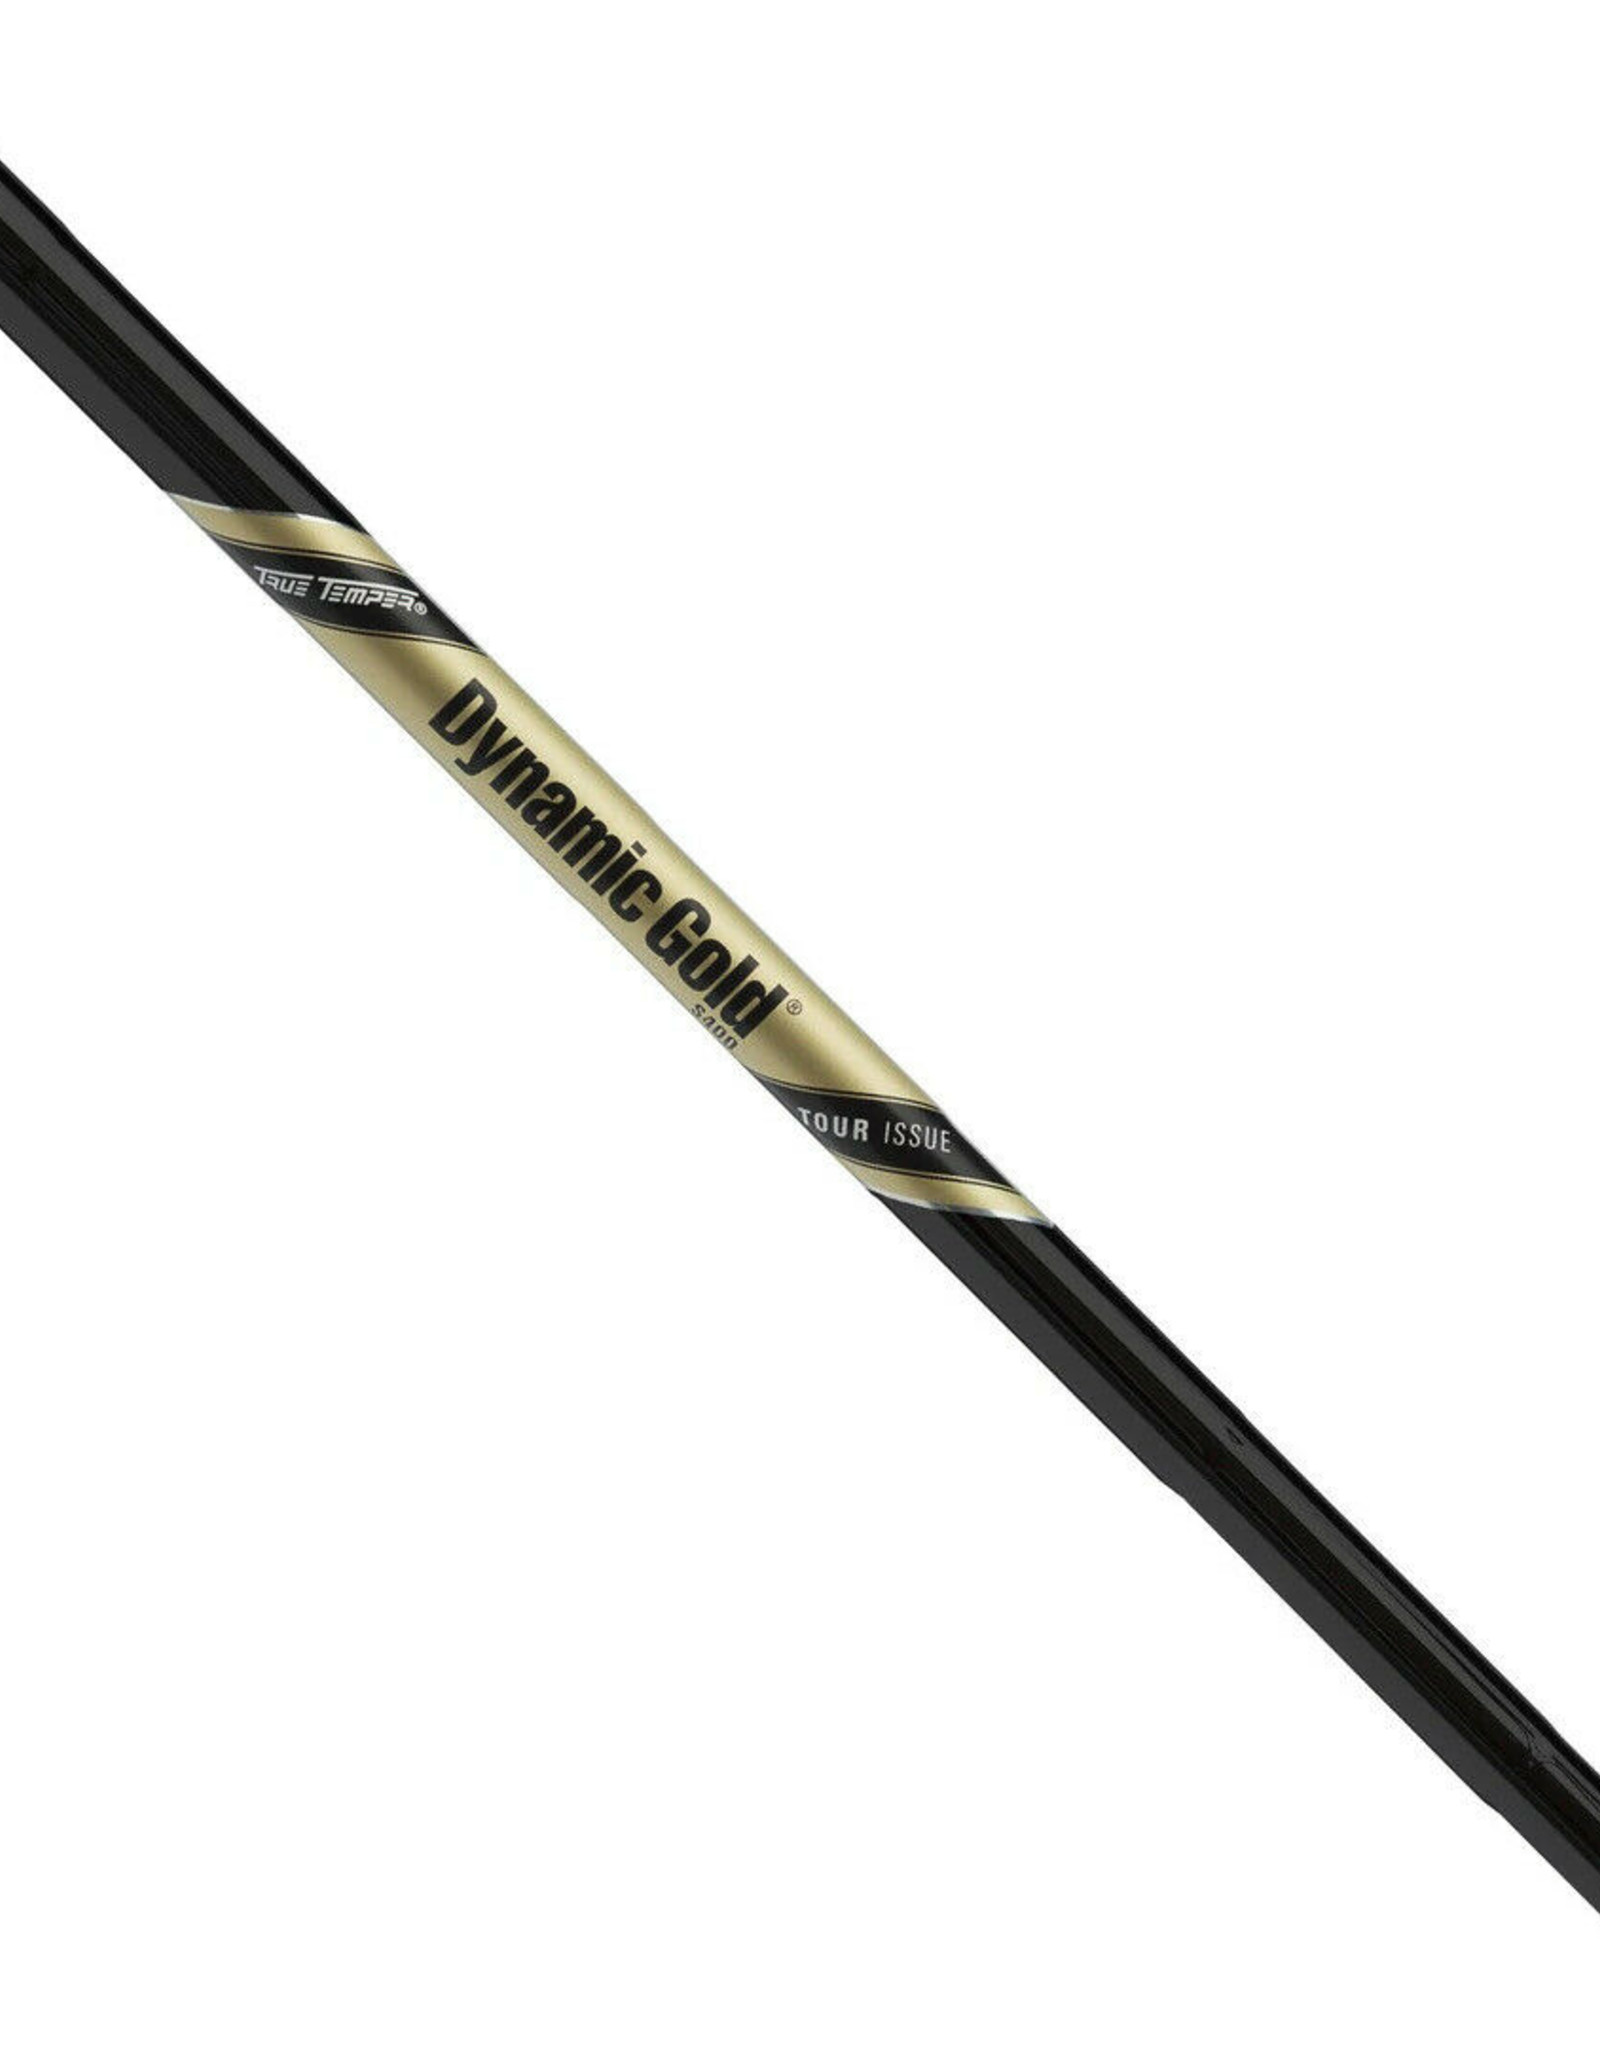 DynamicGold S400 Blk Chrm Wedge Shaft